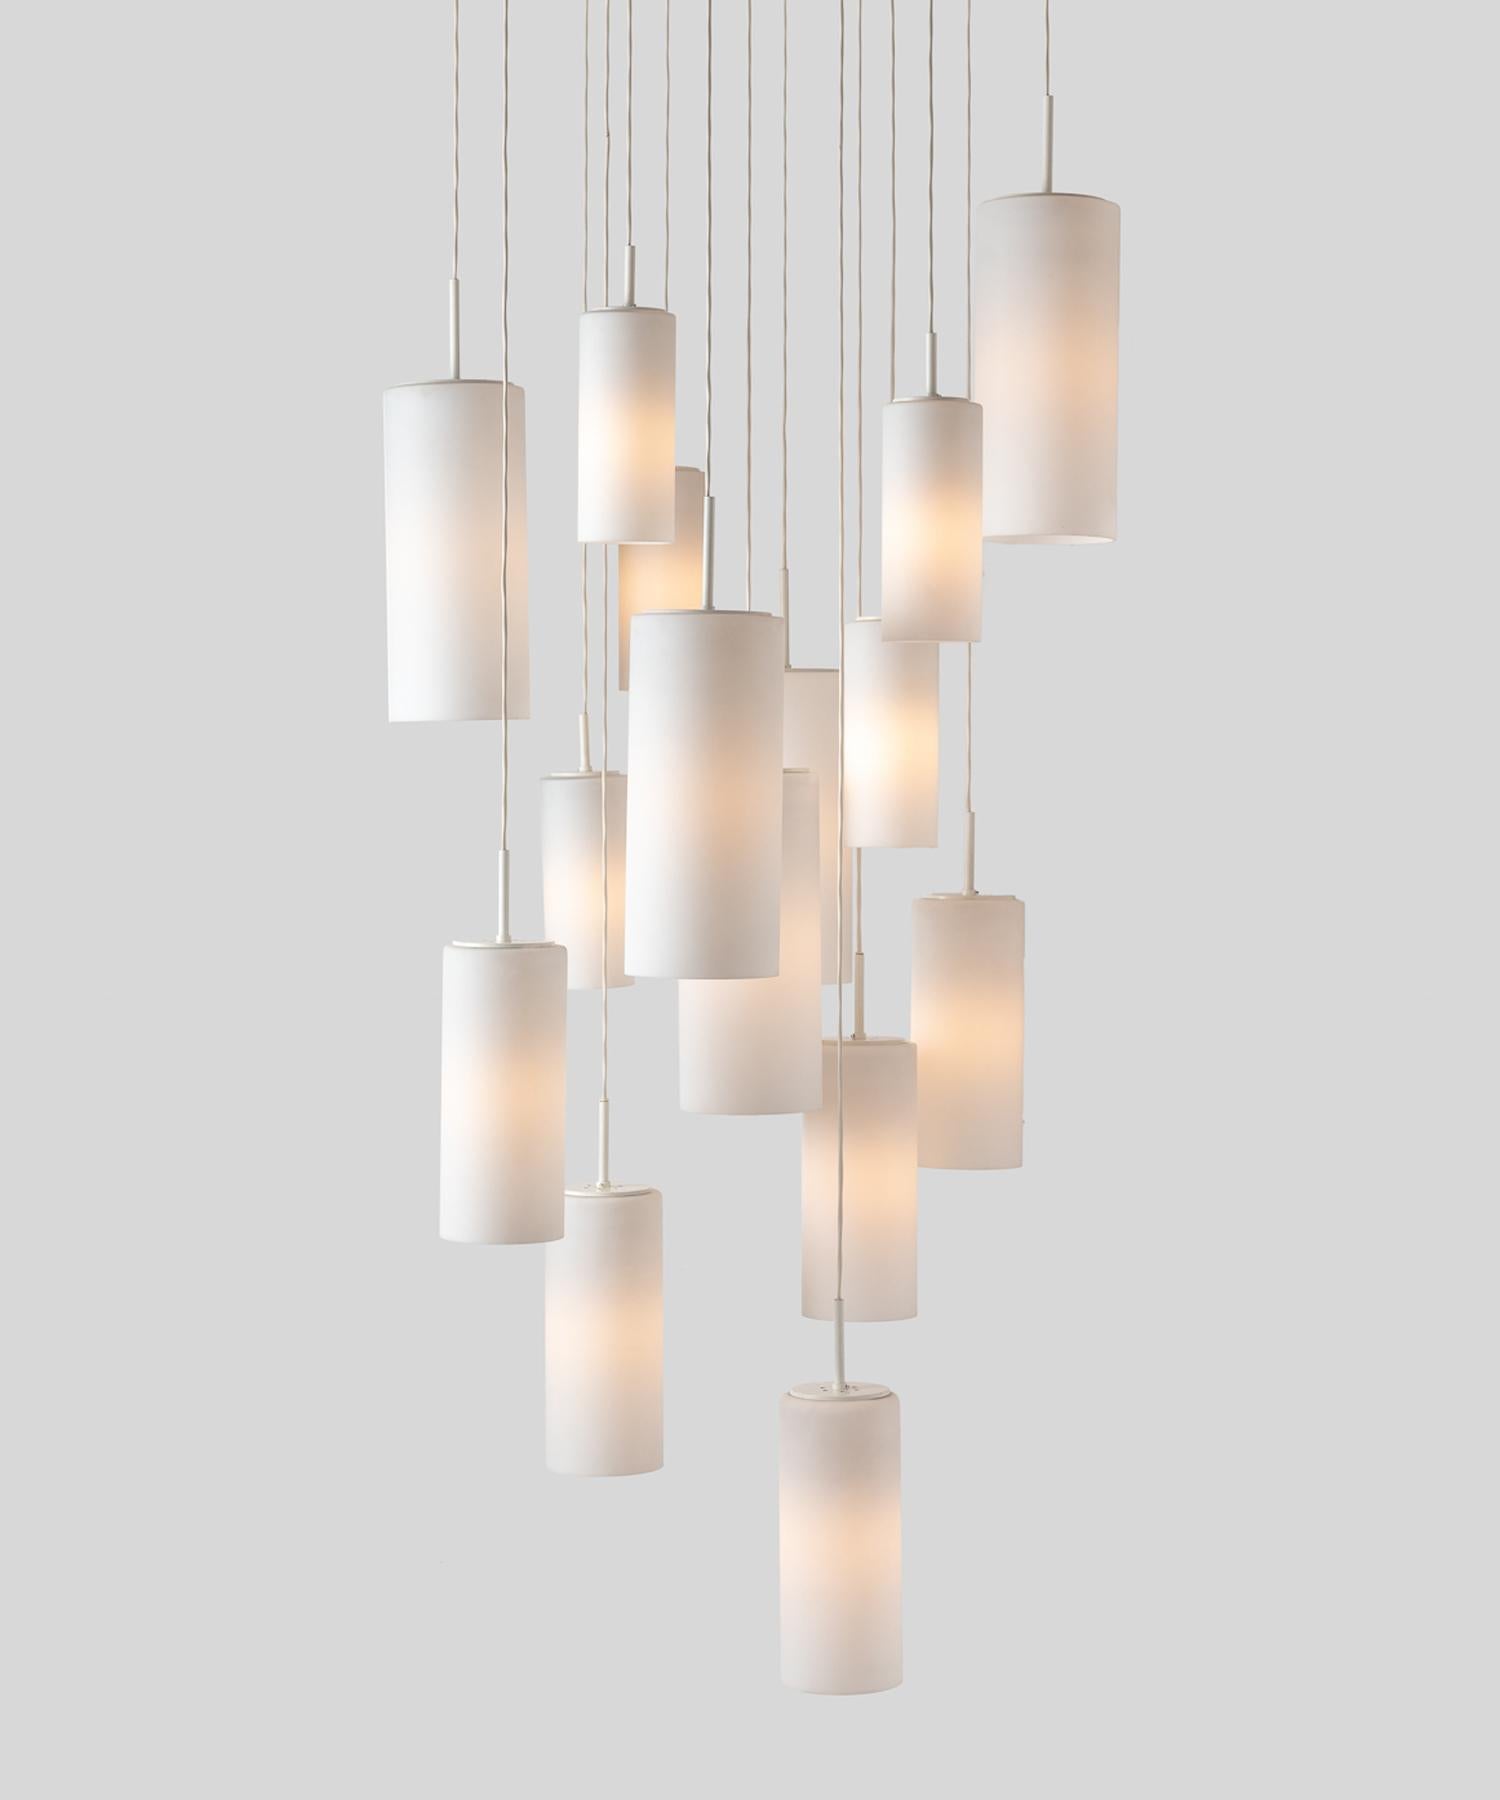 Opaline suspension chandelier by Philips, circa 1960

Large-scale piece with cascading opaline cylinders at adjustable heights.